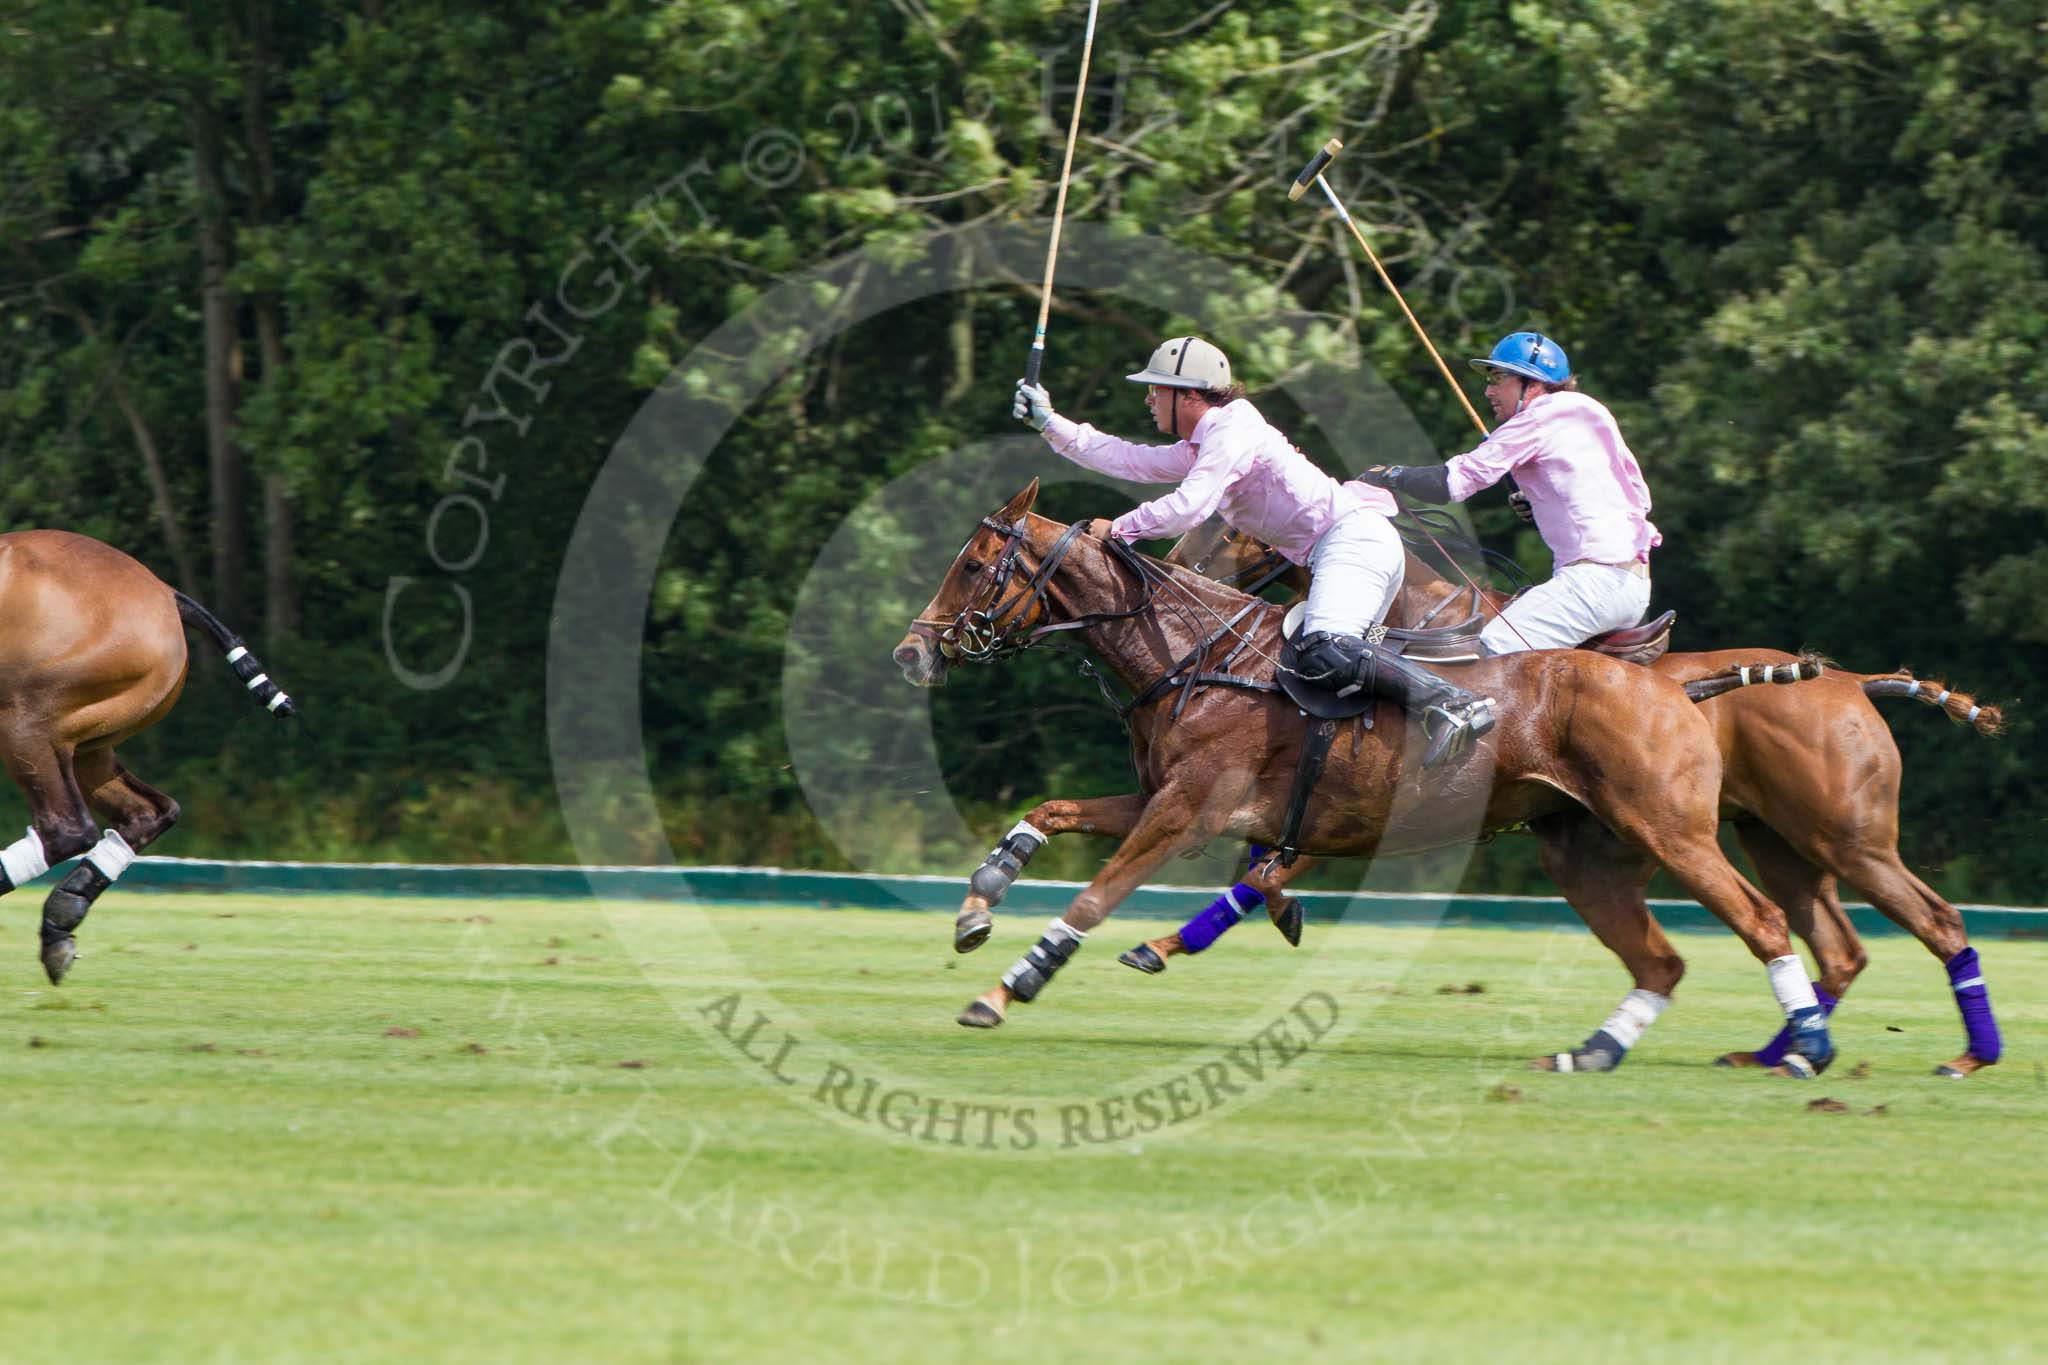 7th Heritage Polo Cup semi-finals: Nico Talamoni braking out with Justo Saveedra Emerging Switzerland following him..
Hurtwood Park Polo Club,
Ewhurst Green,
Surrey,
United Kingdom,
on 04 August 2012 at 11:45, image #77